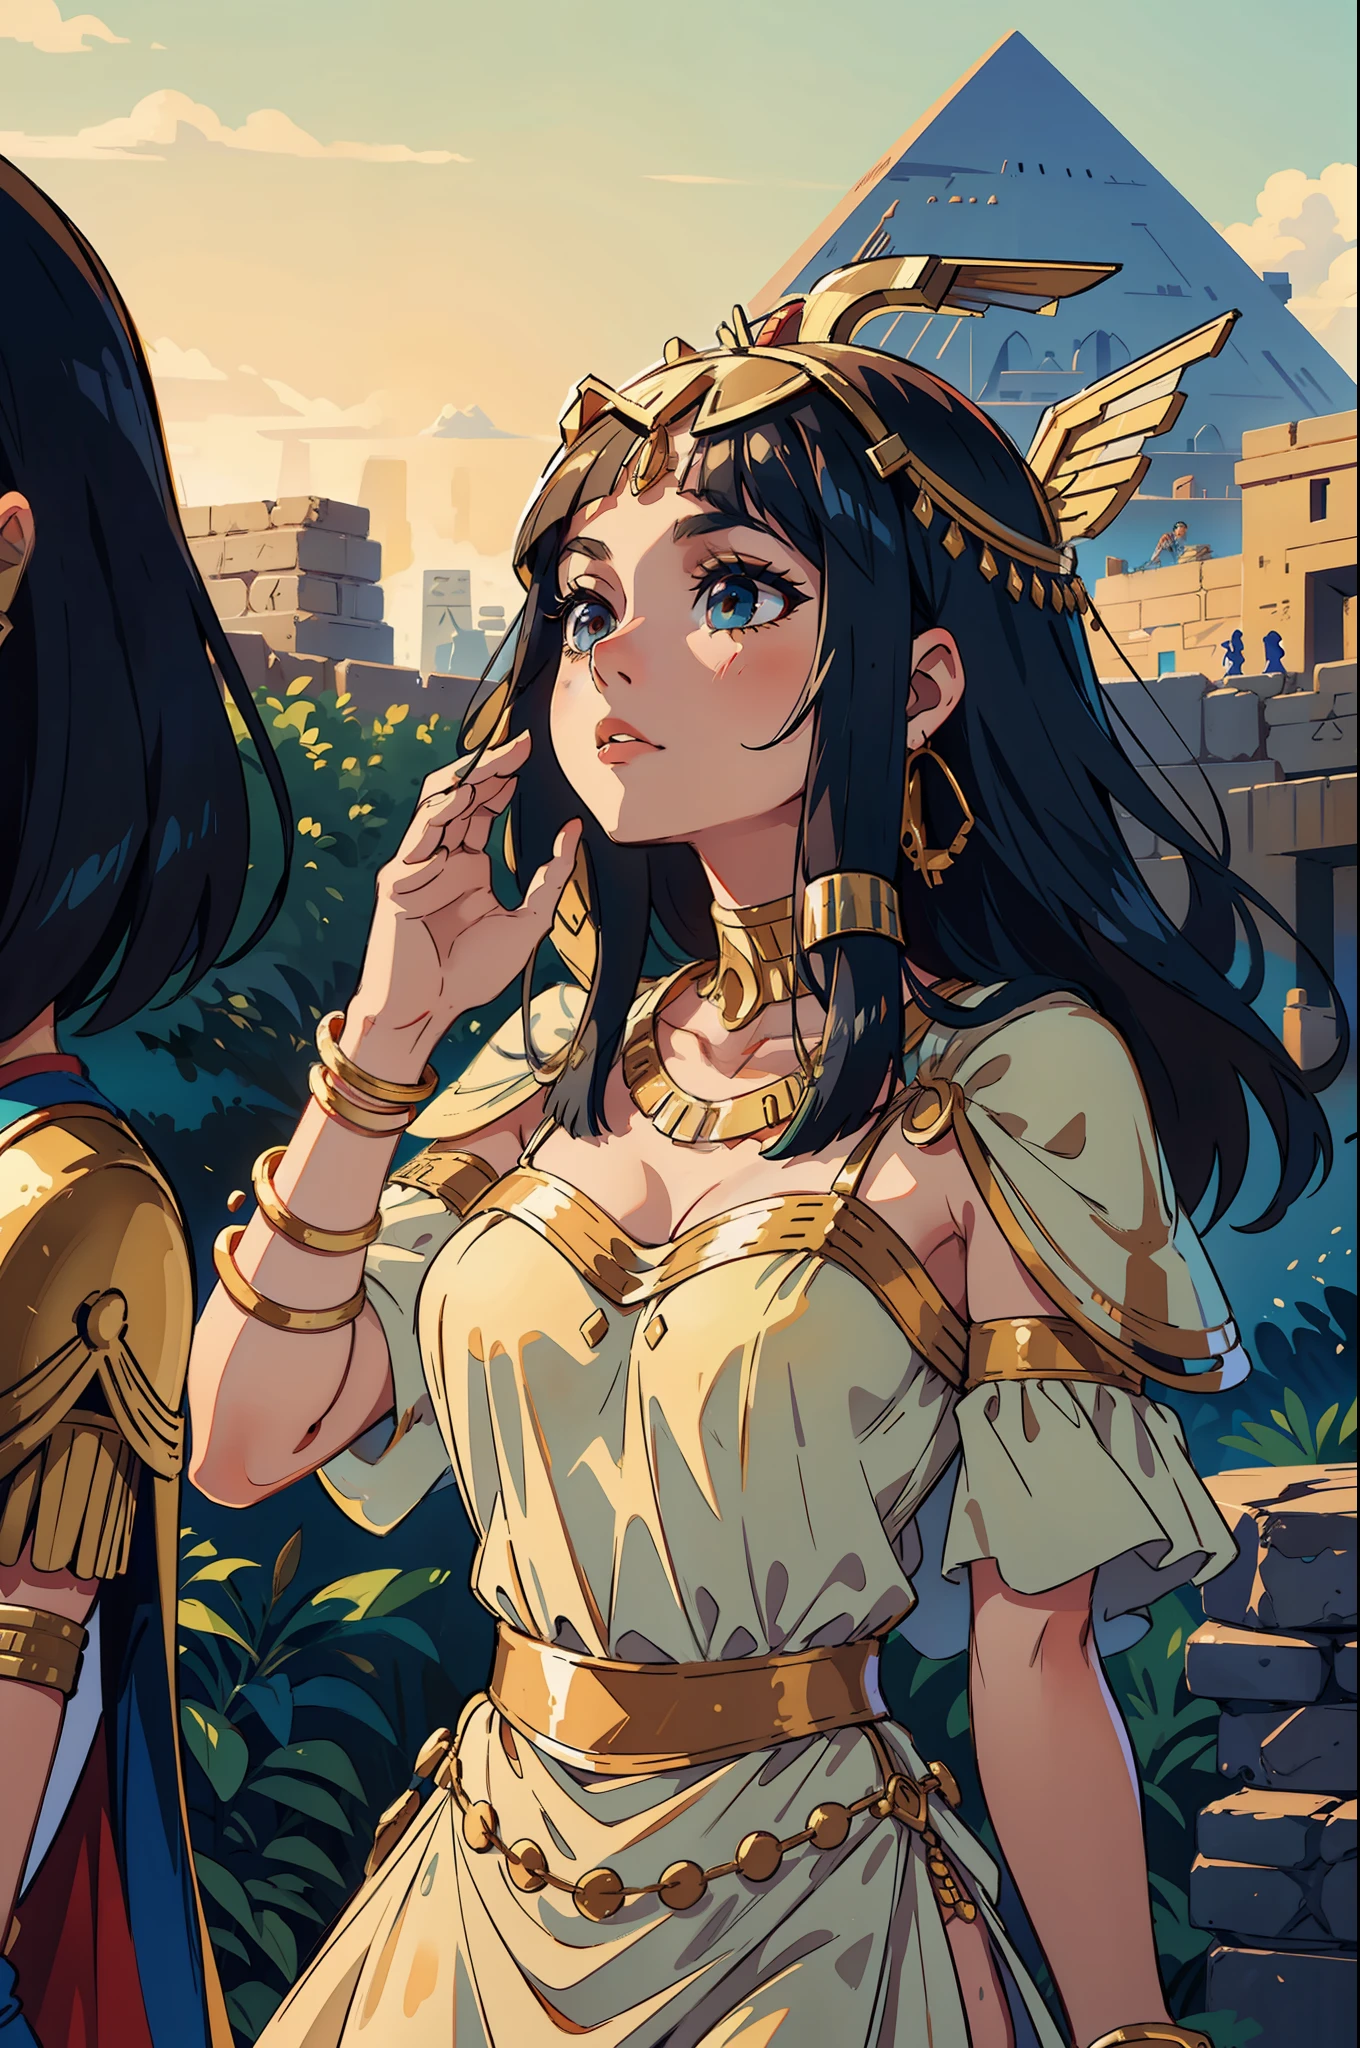 "Cleopatra engaging in a profound conversation with a captivated crowd of Egyptians, encircled by their undivided attention, as the majestic pyramids stand tall in the enchanting background."